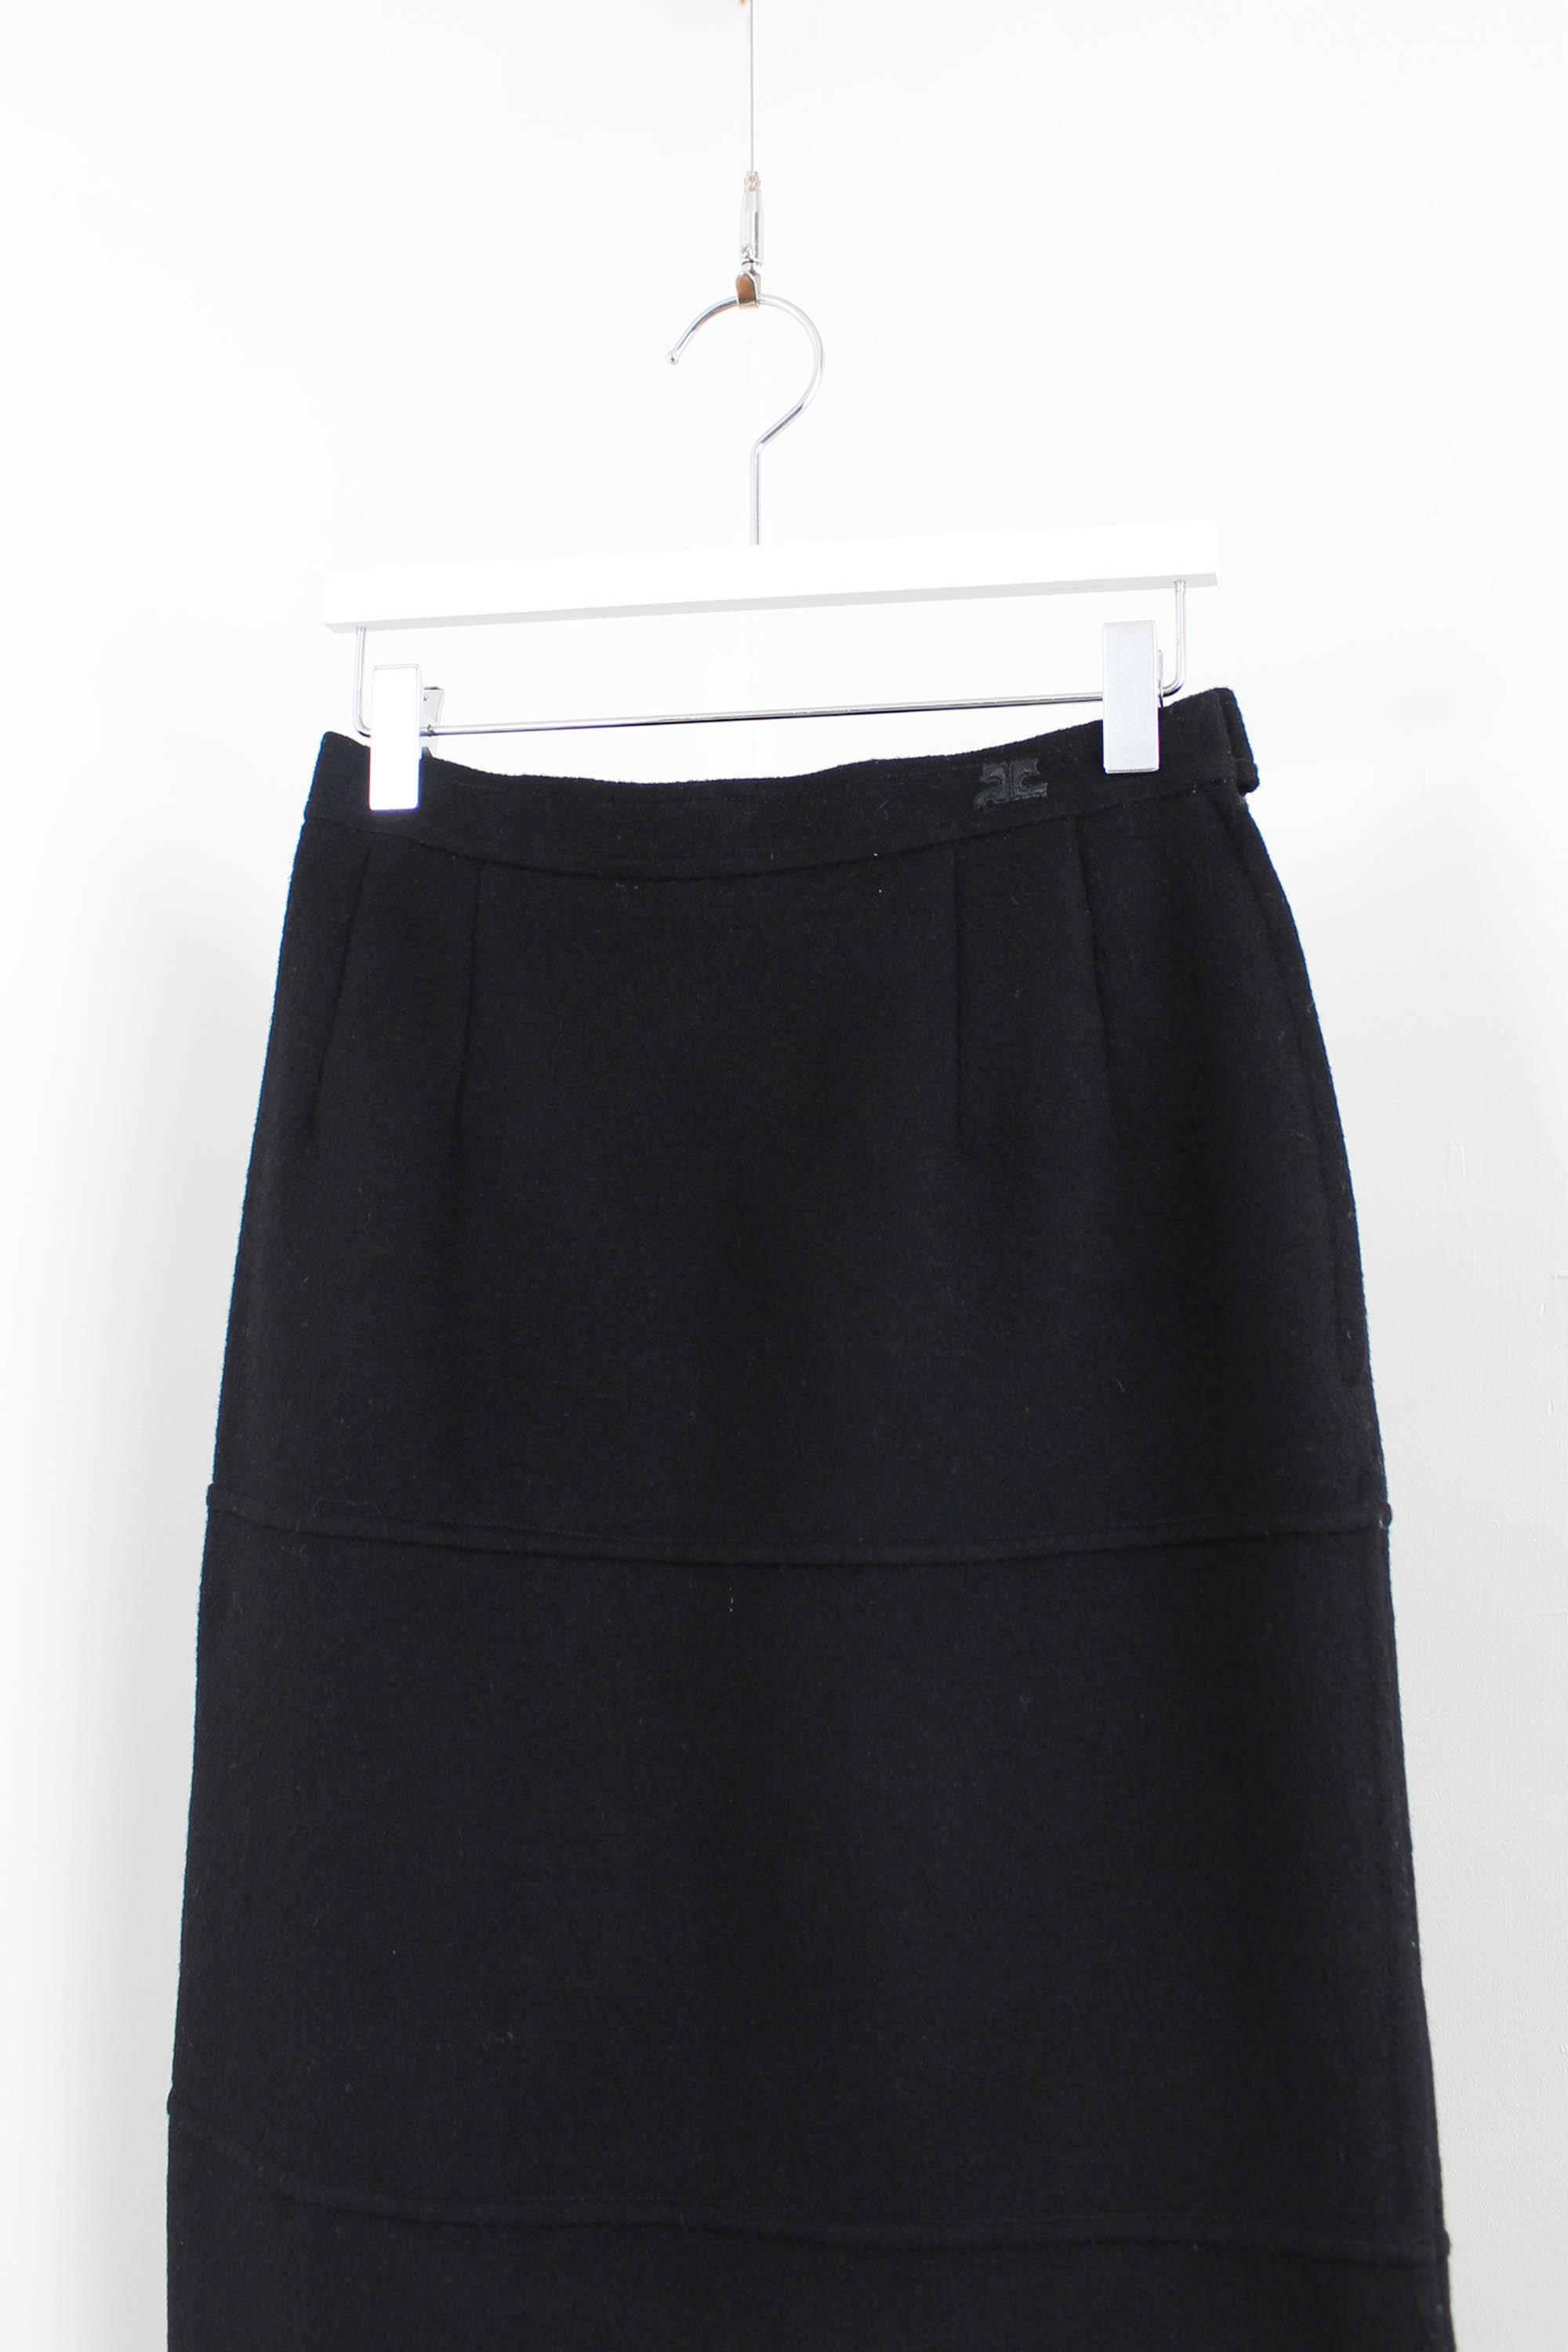 courreges wool skirt